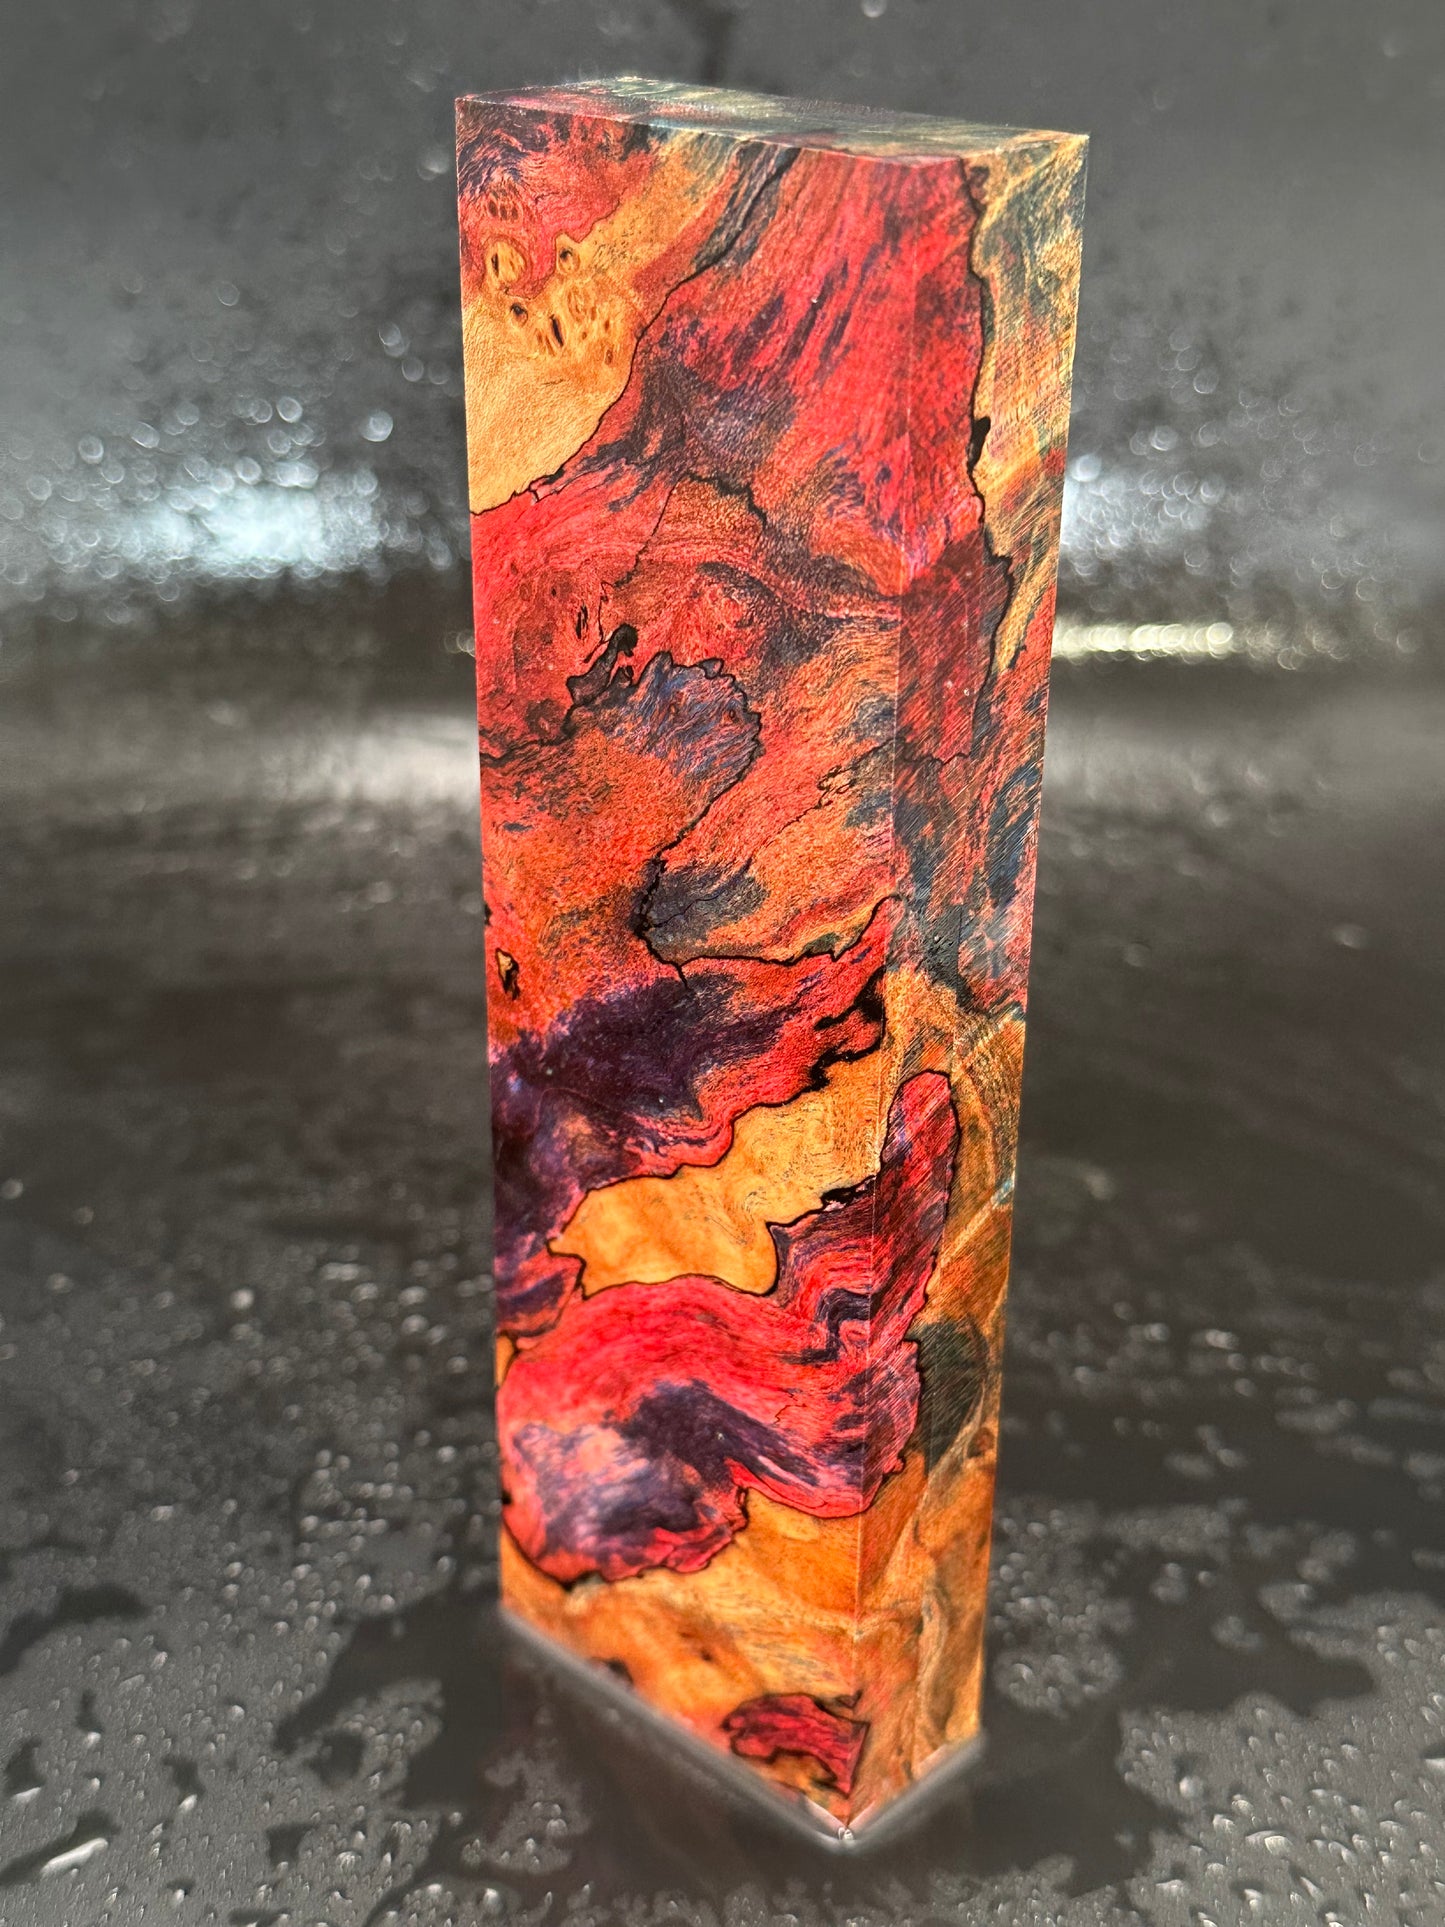 Stabilized Spalted Maple Burl Scales